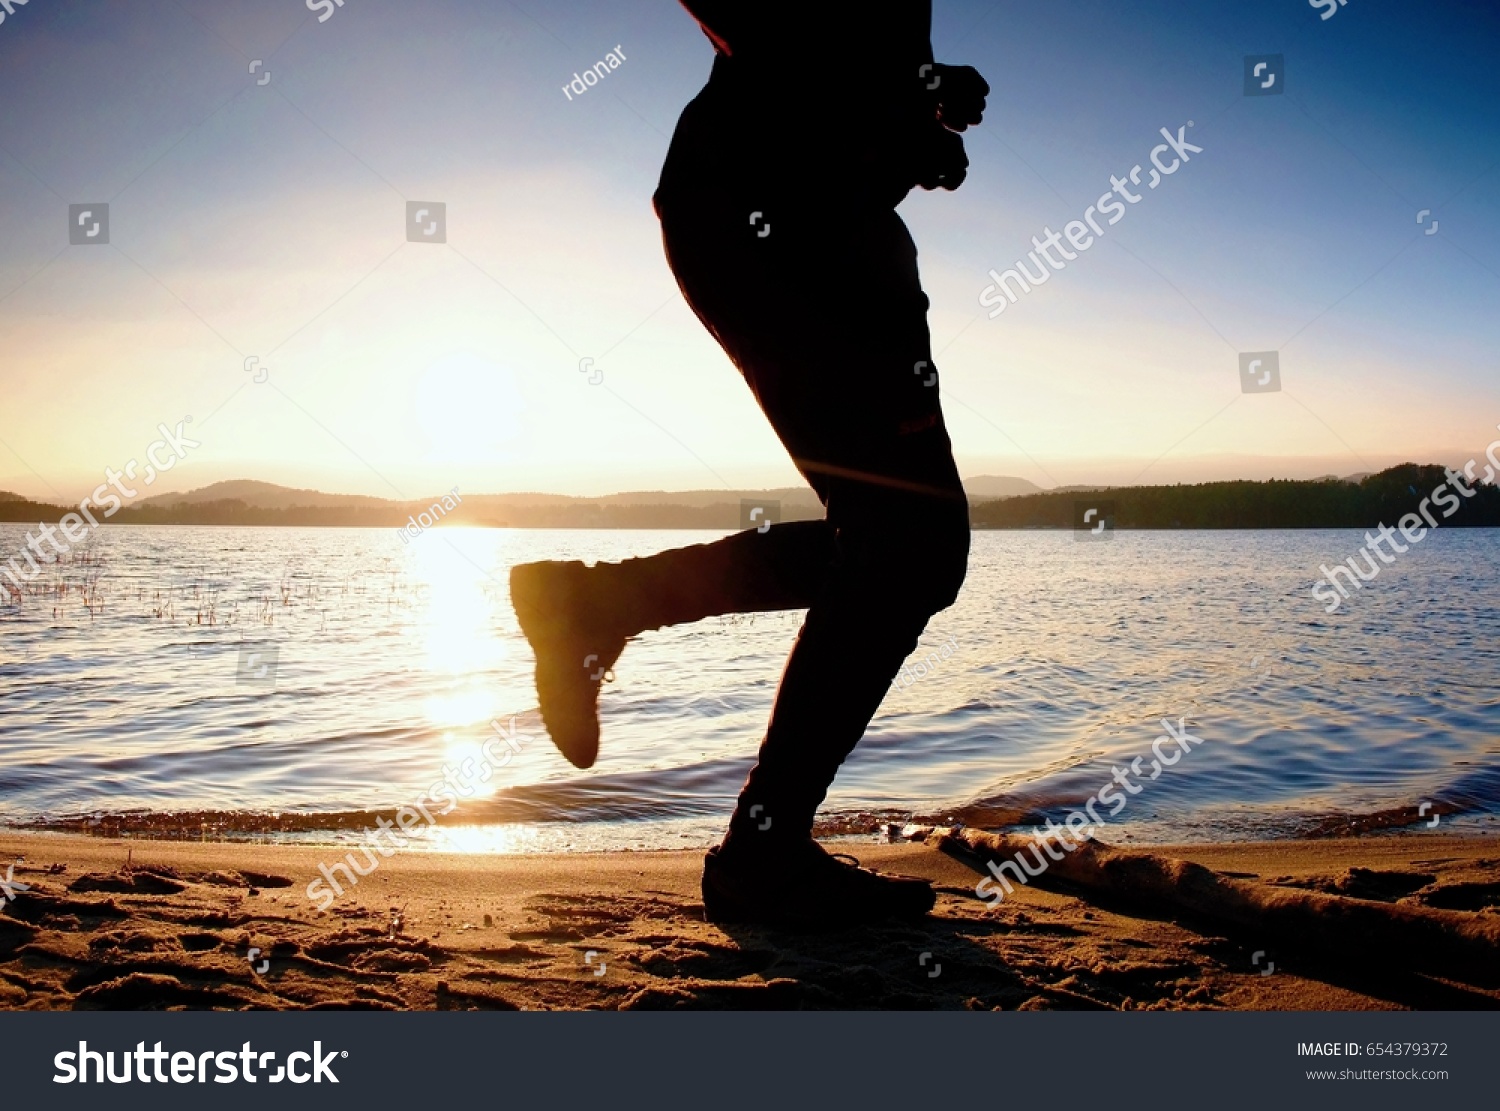 Unconscious Lukewarm The actual Young Male Runner Running On Empty Stock Photo 18642520 | Shutterstock